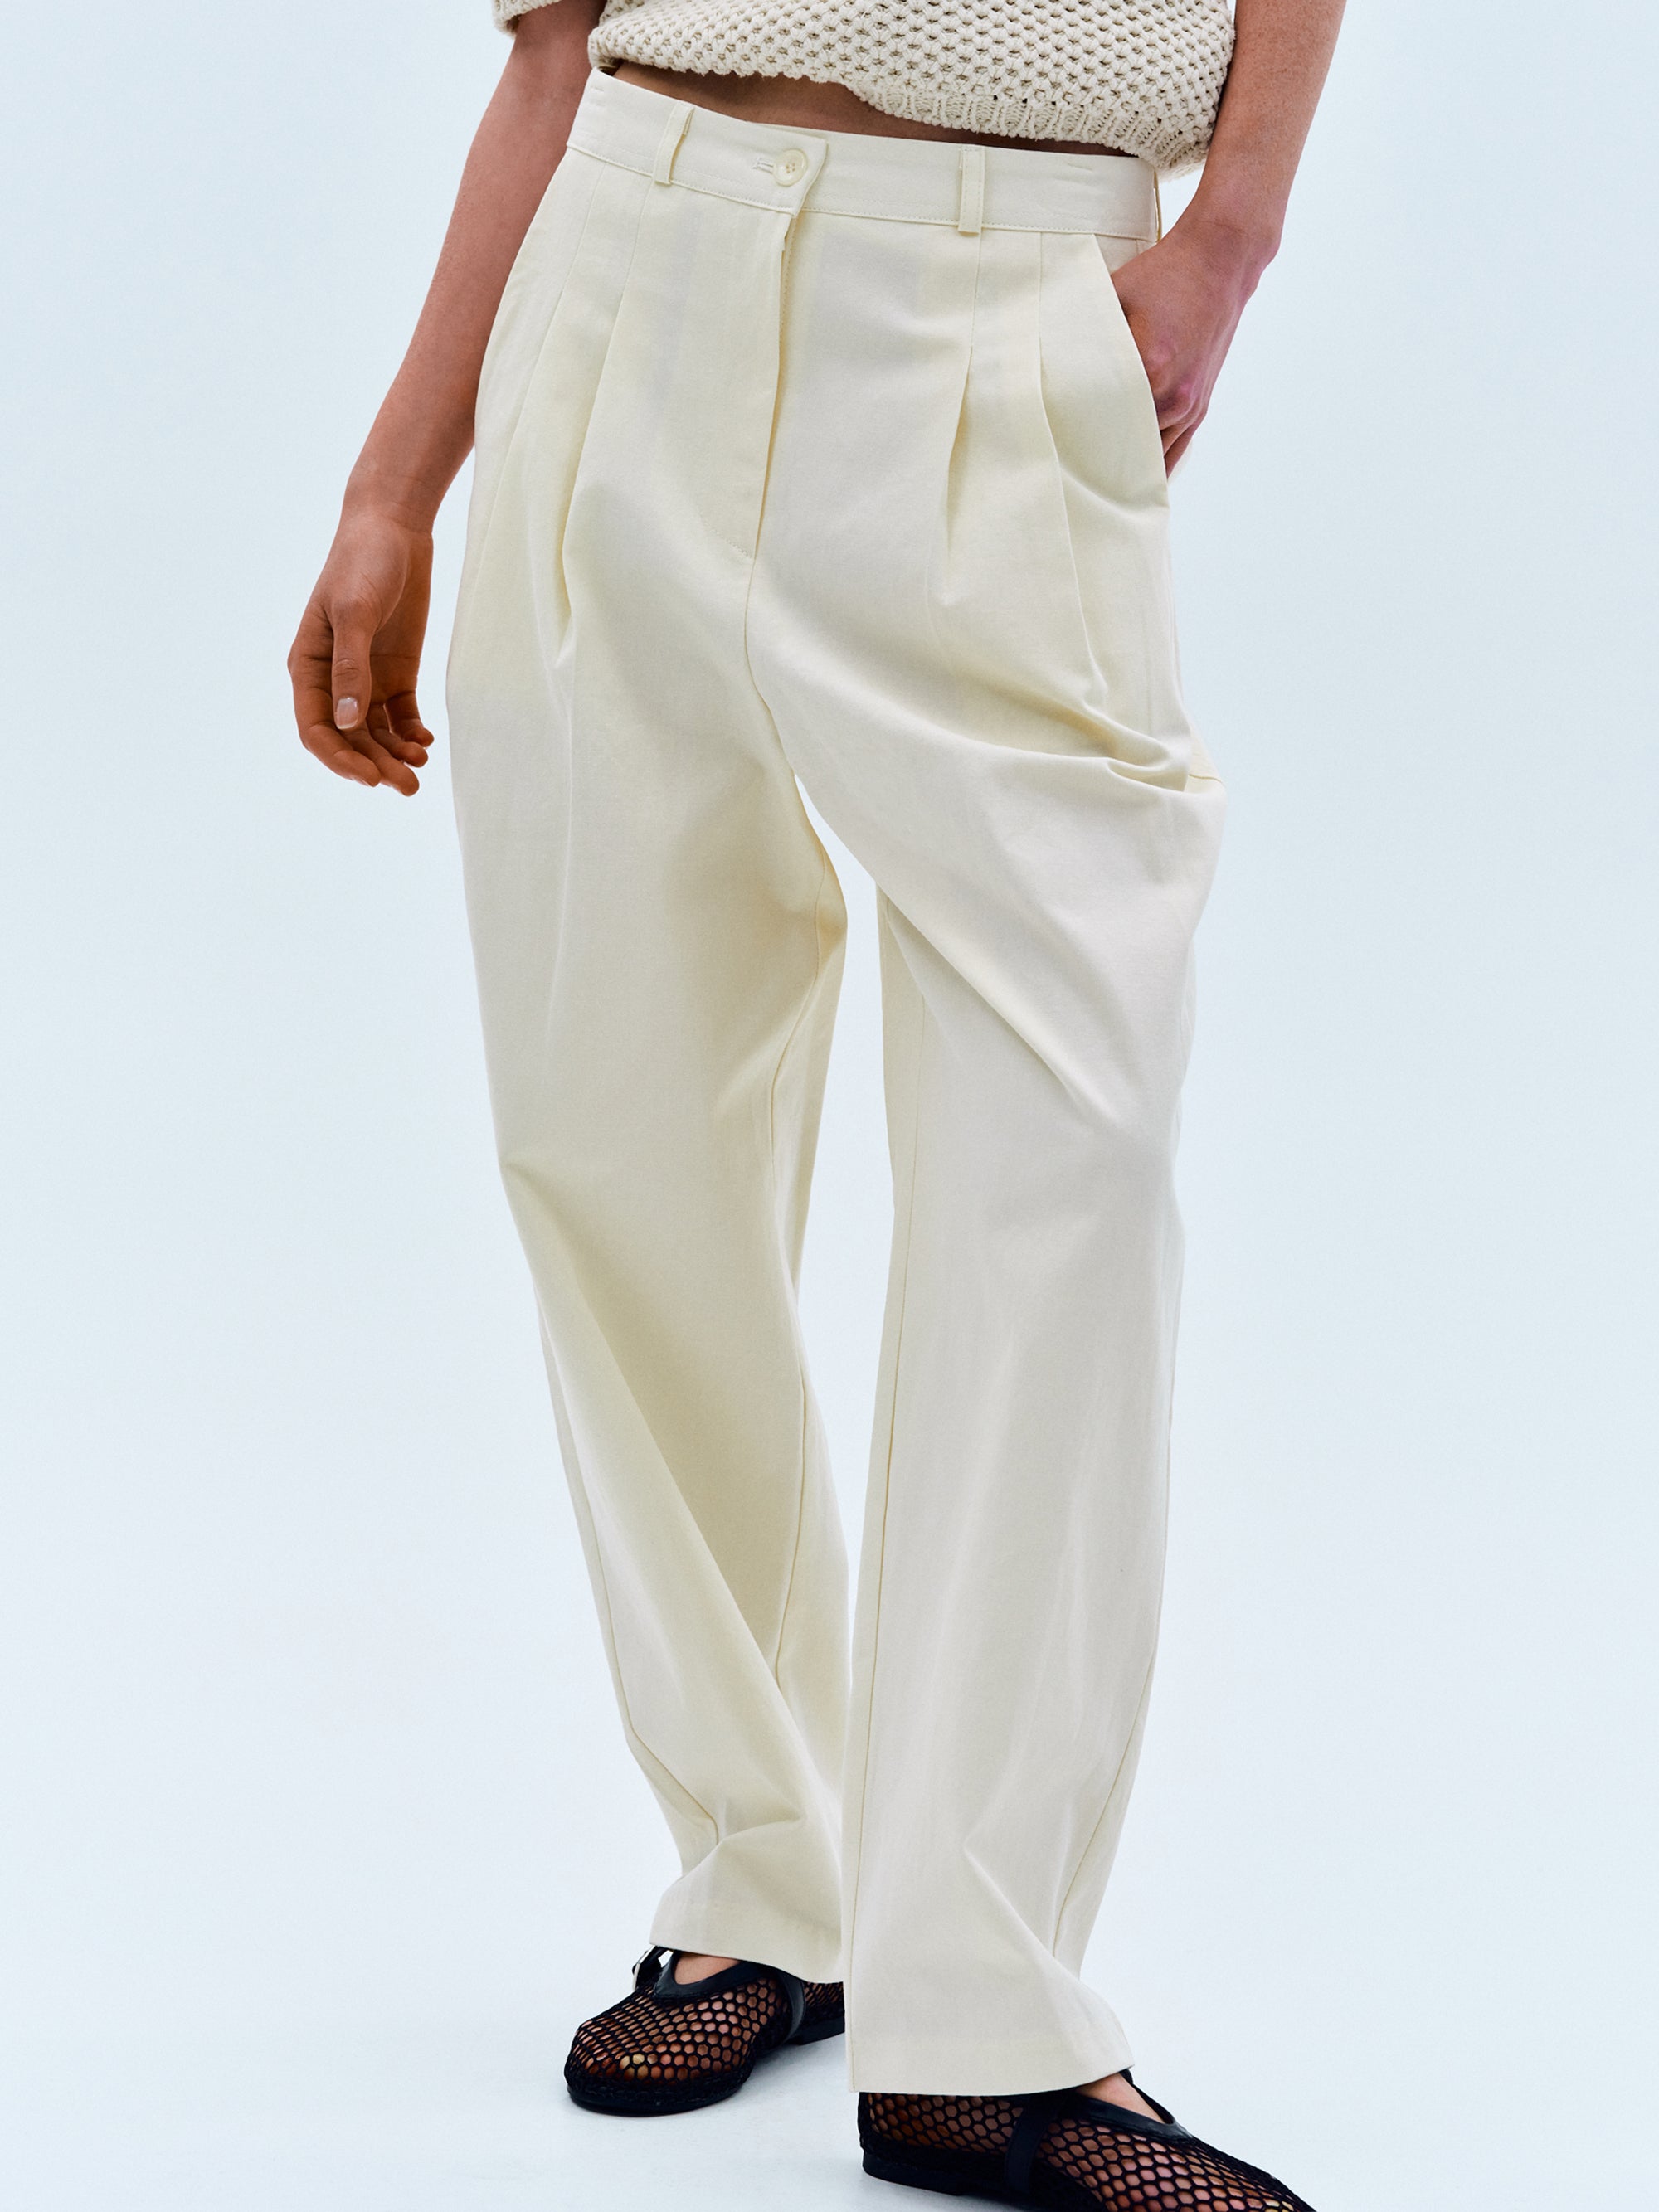 Double Pintuck Trousers, Cream – SourceUnknown